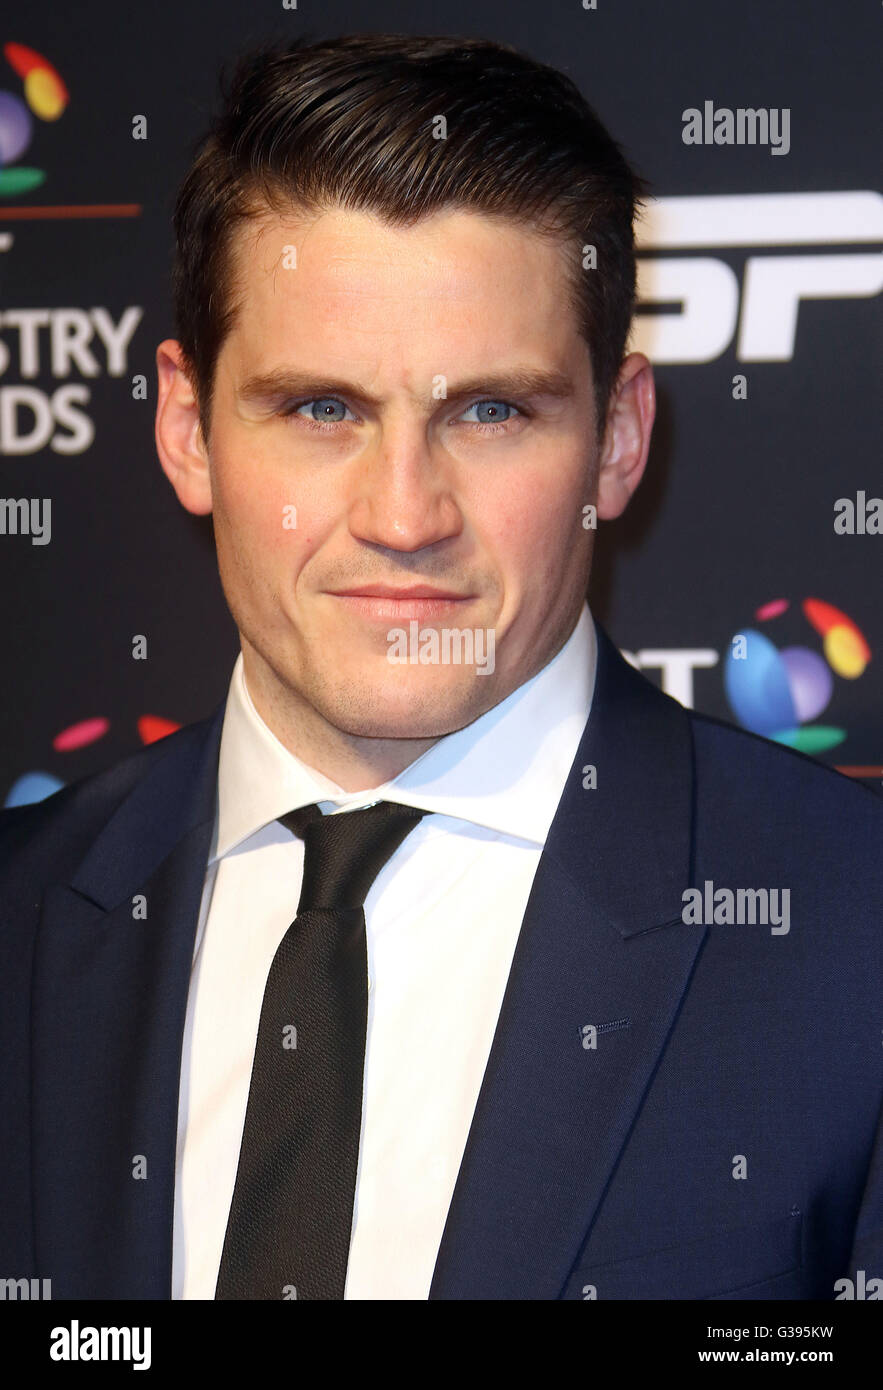 Shane mcguigan hi-res stock photography and images - Alamy